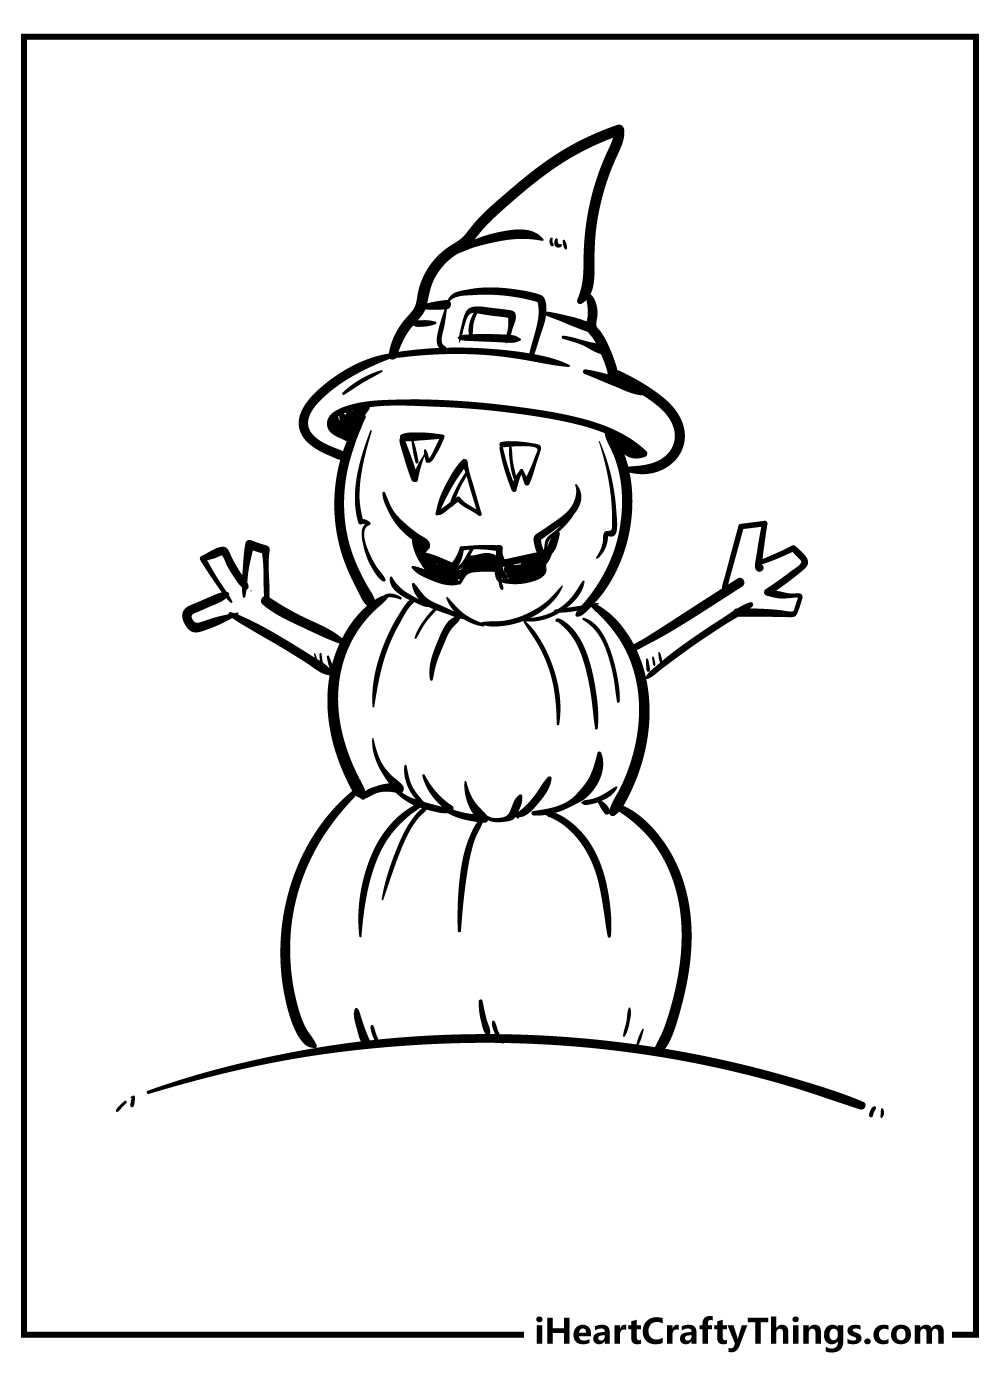 Spooky Coloring Sheet for children free download